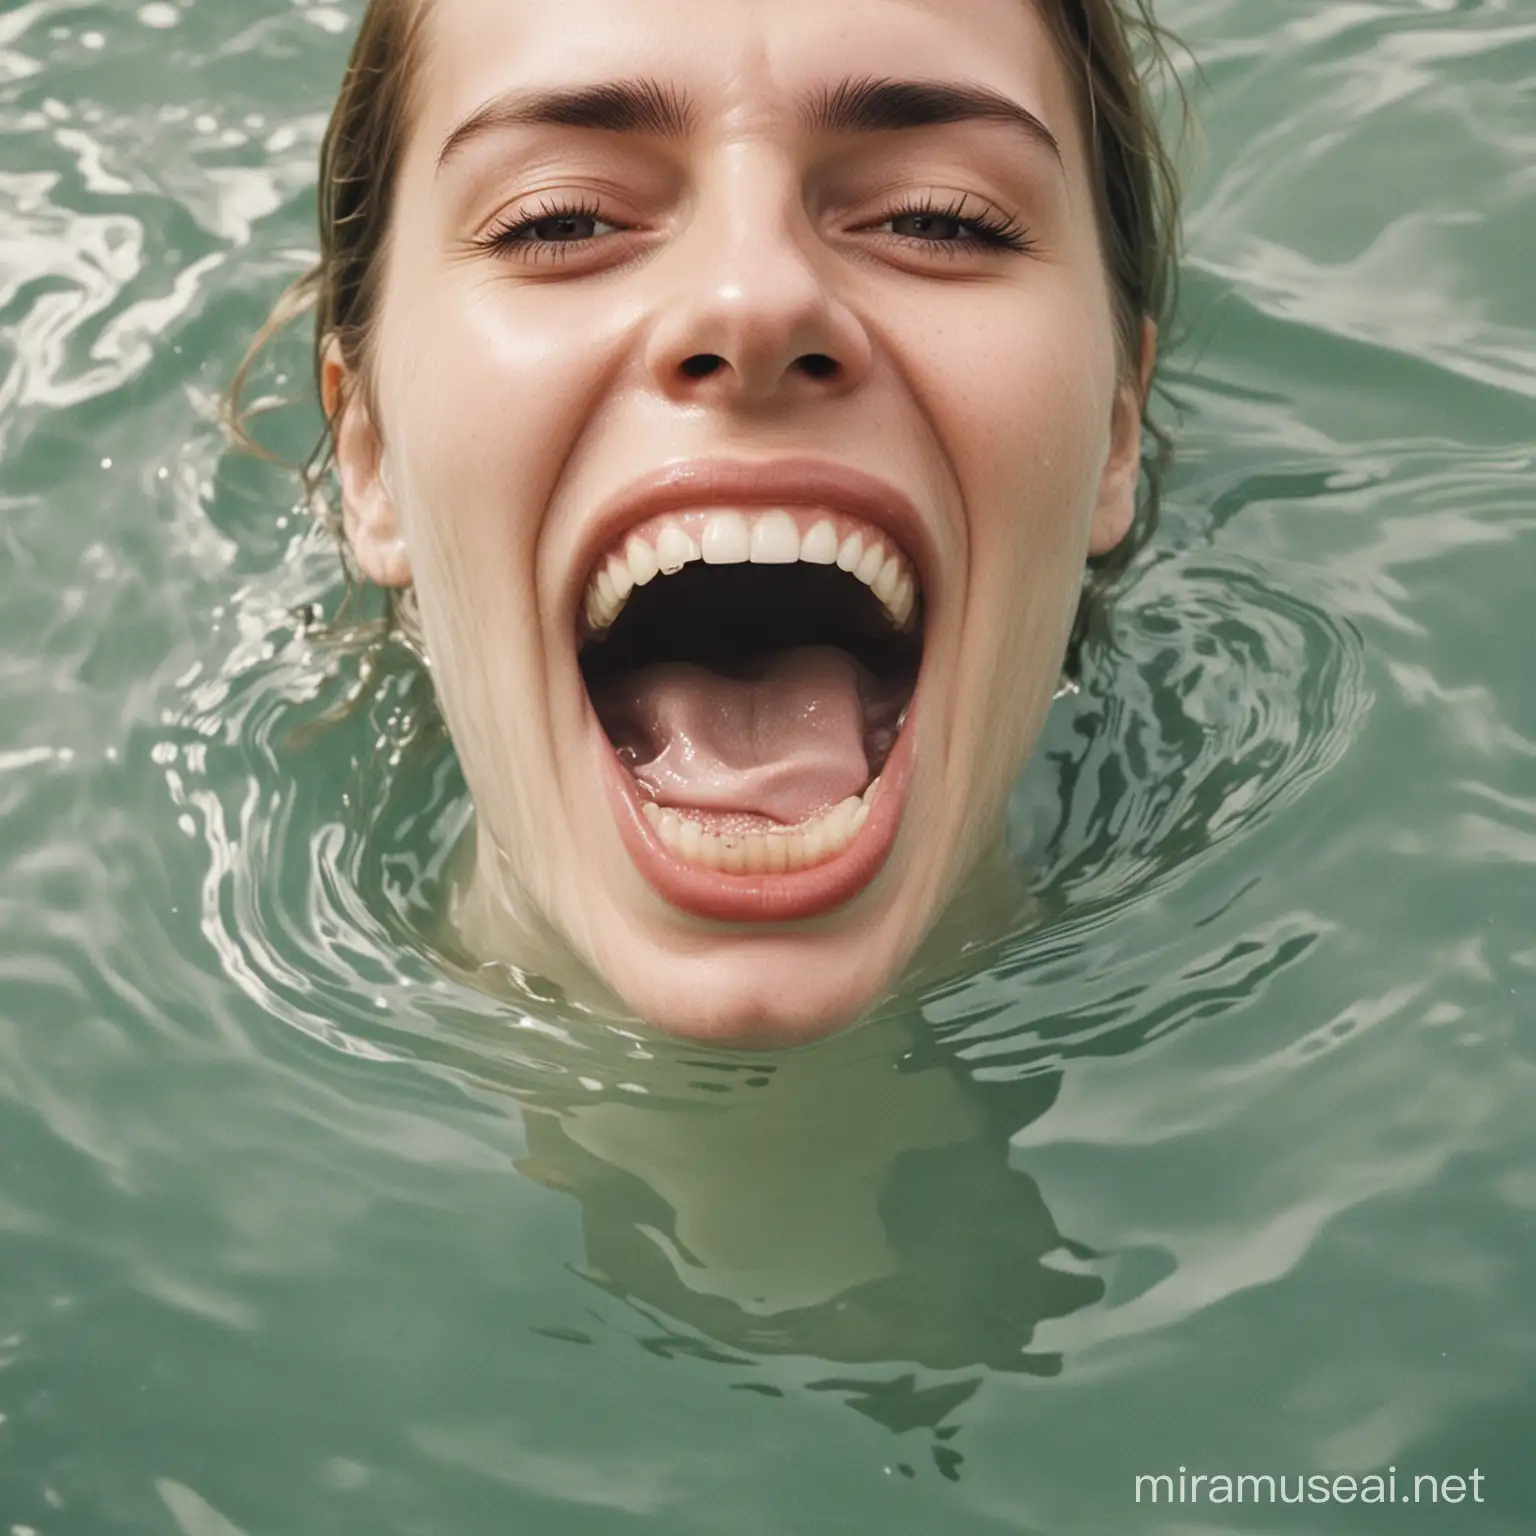 Person with Hand in Mouth Surrounded by Marbled Water